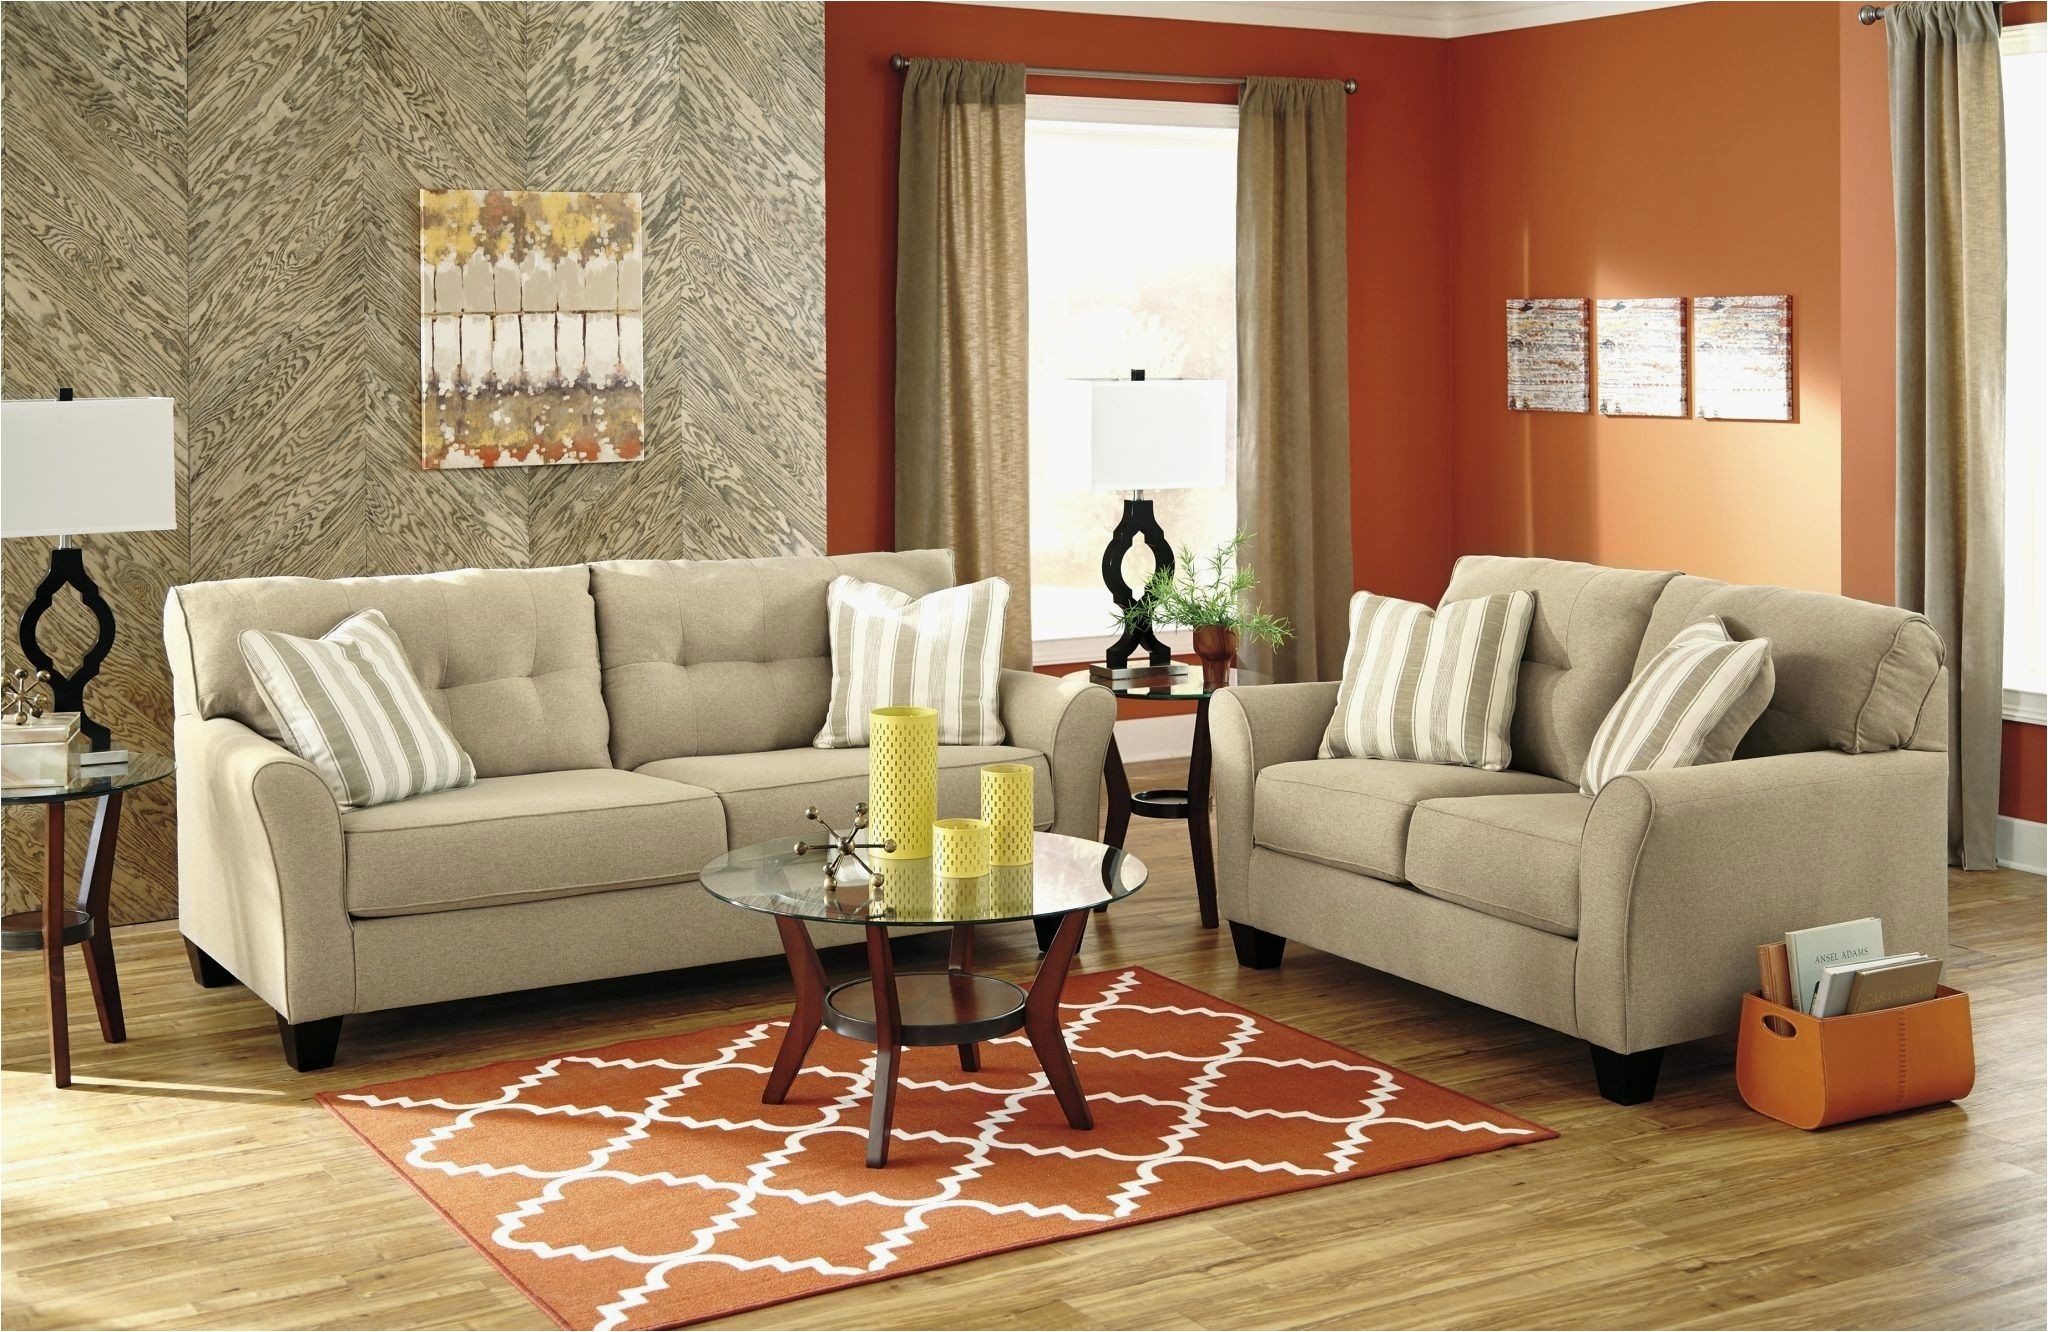 ashley furniture brown couch fresh living room 18 ashley furniture living room sets 999 ravishing images